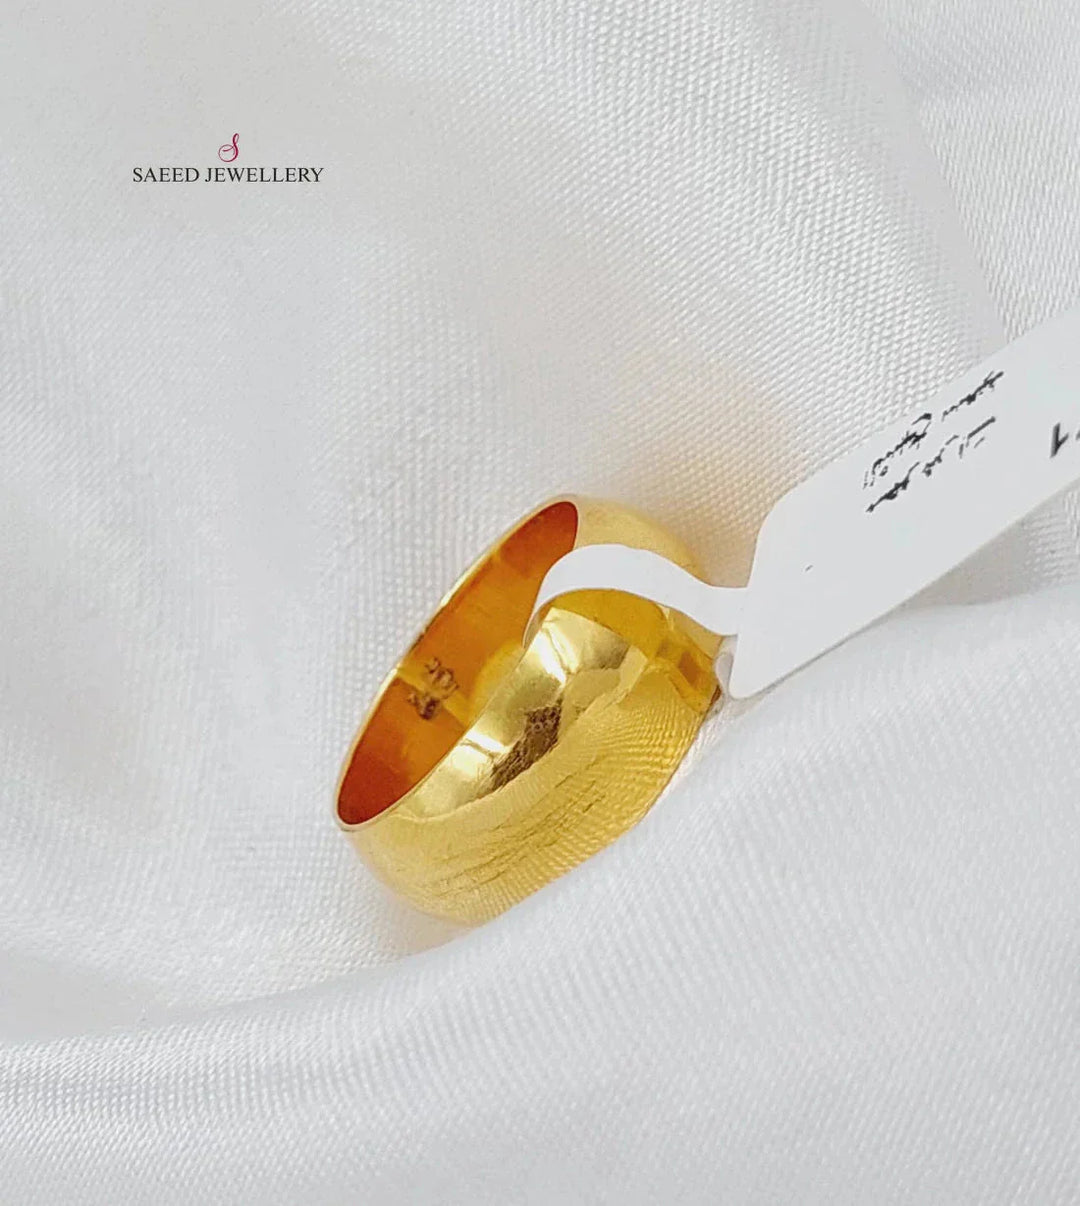 21K Gold Bold Wedding Ring by Saeed Jewelry - Image 5